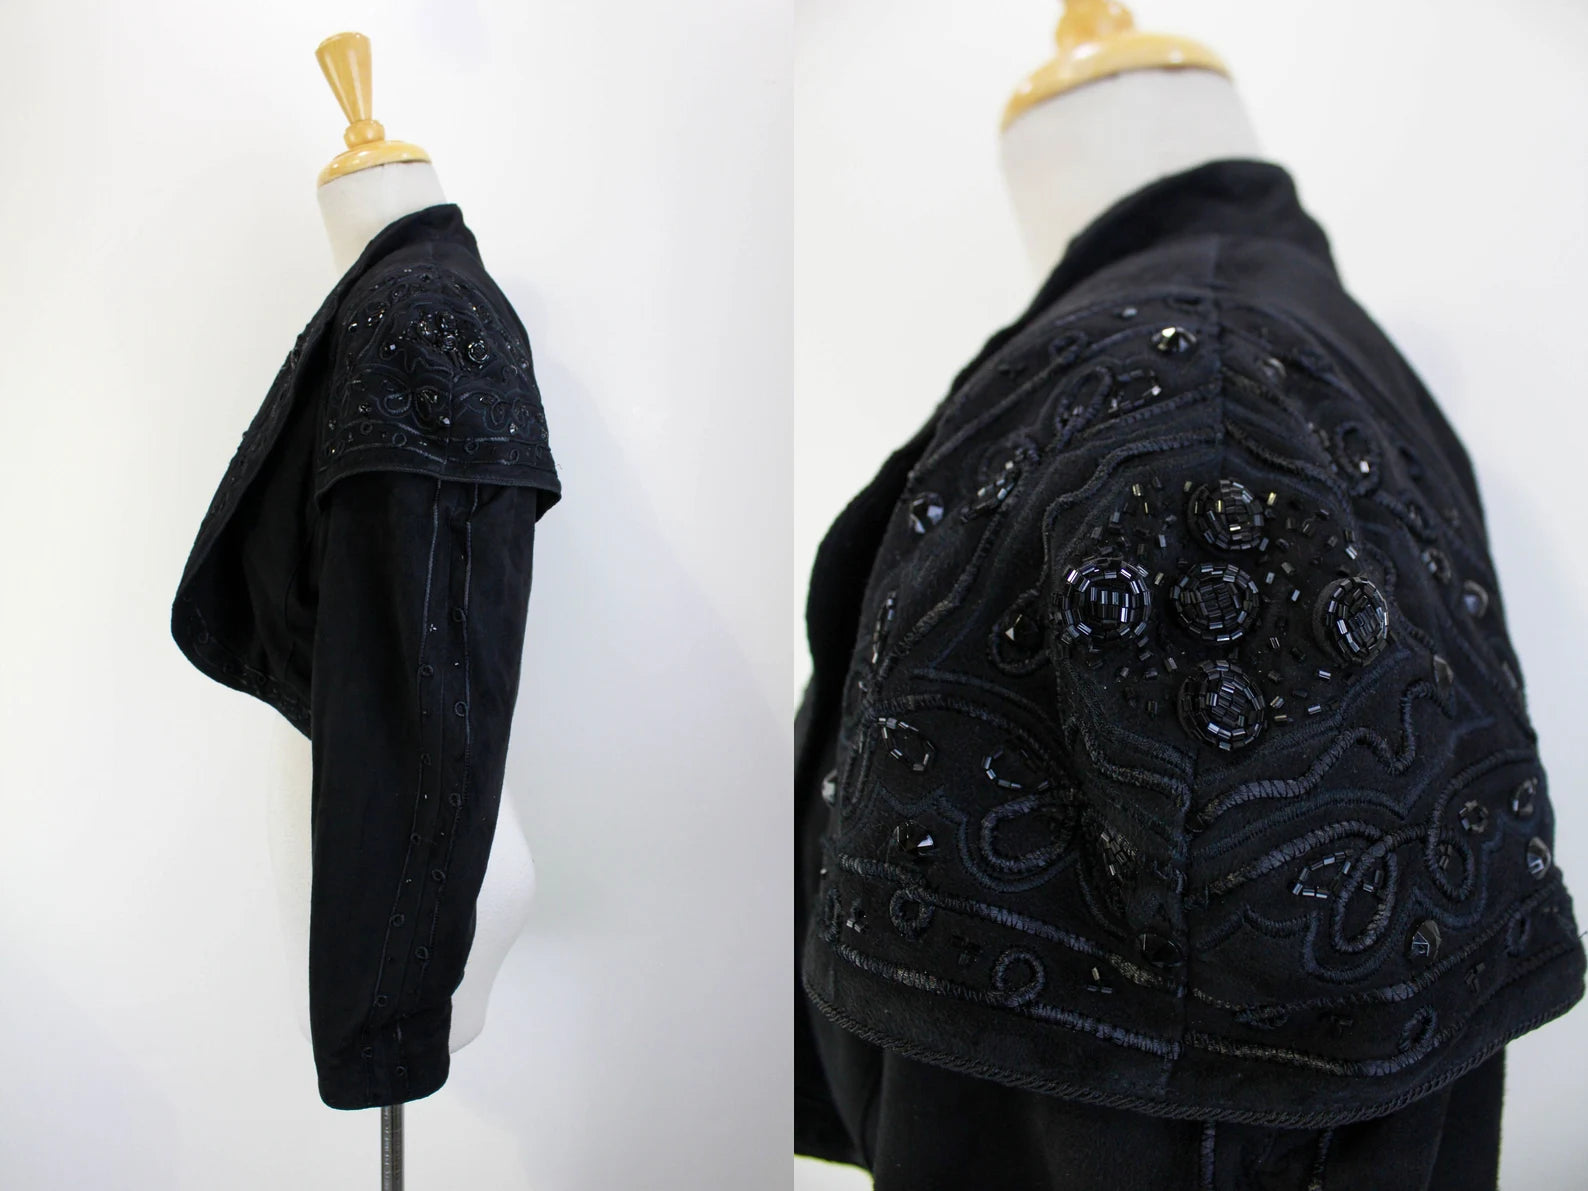 80s Suede Bolero Jacket, Beaded, Embroidered, Cropped Vintage Black Leather Jacket, Mercedes & Adrienne